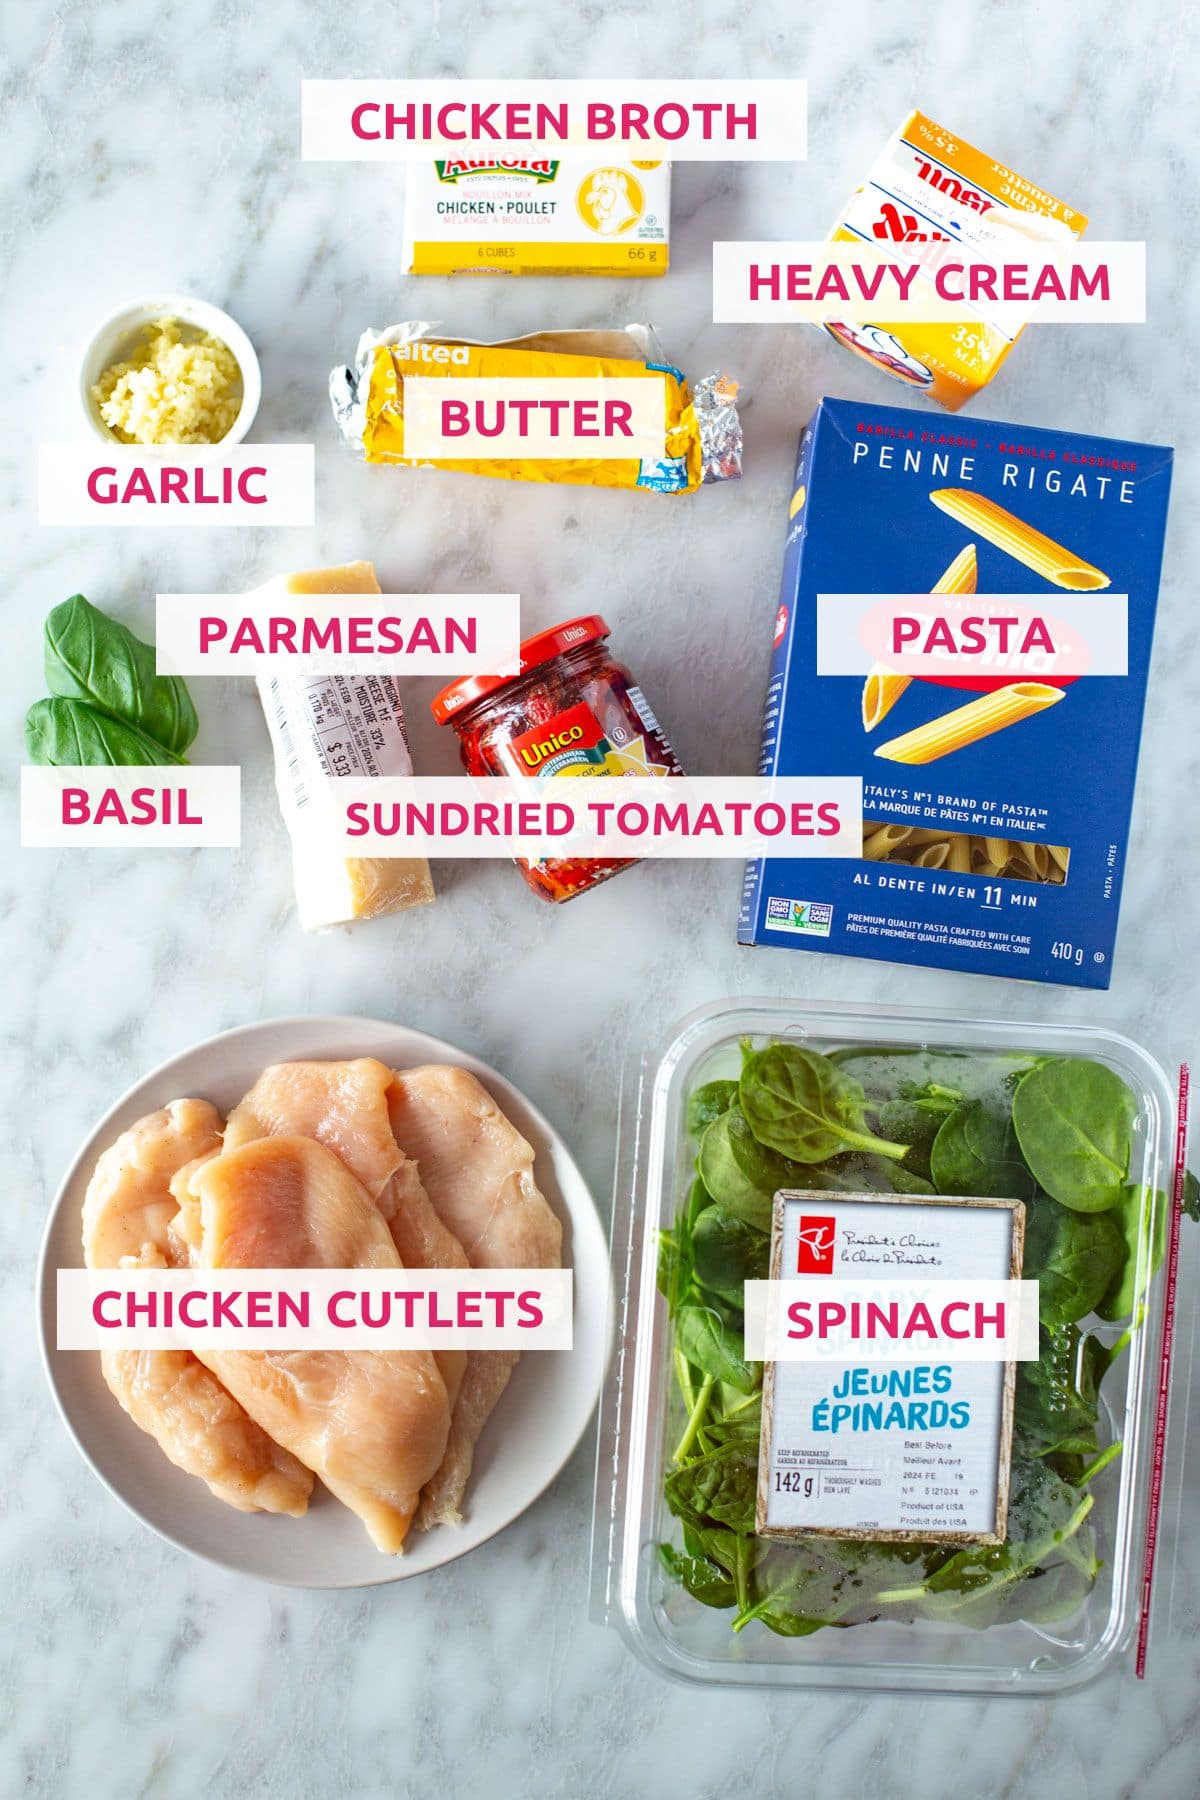 Ingredients for marry me chicken: chicken broth, garlic, butter, heavy cream, parmesan, basil, sundried tomatoes, pasta, chicken cutlets and spinach